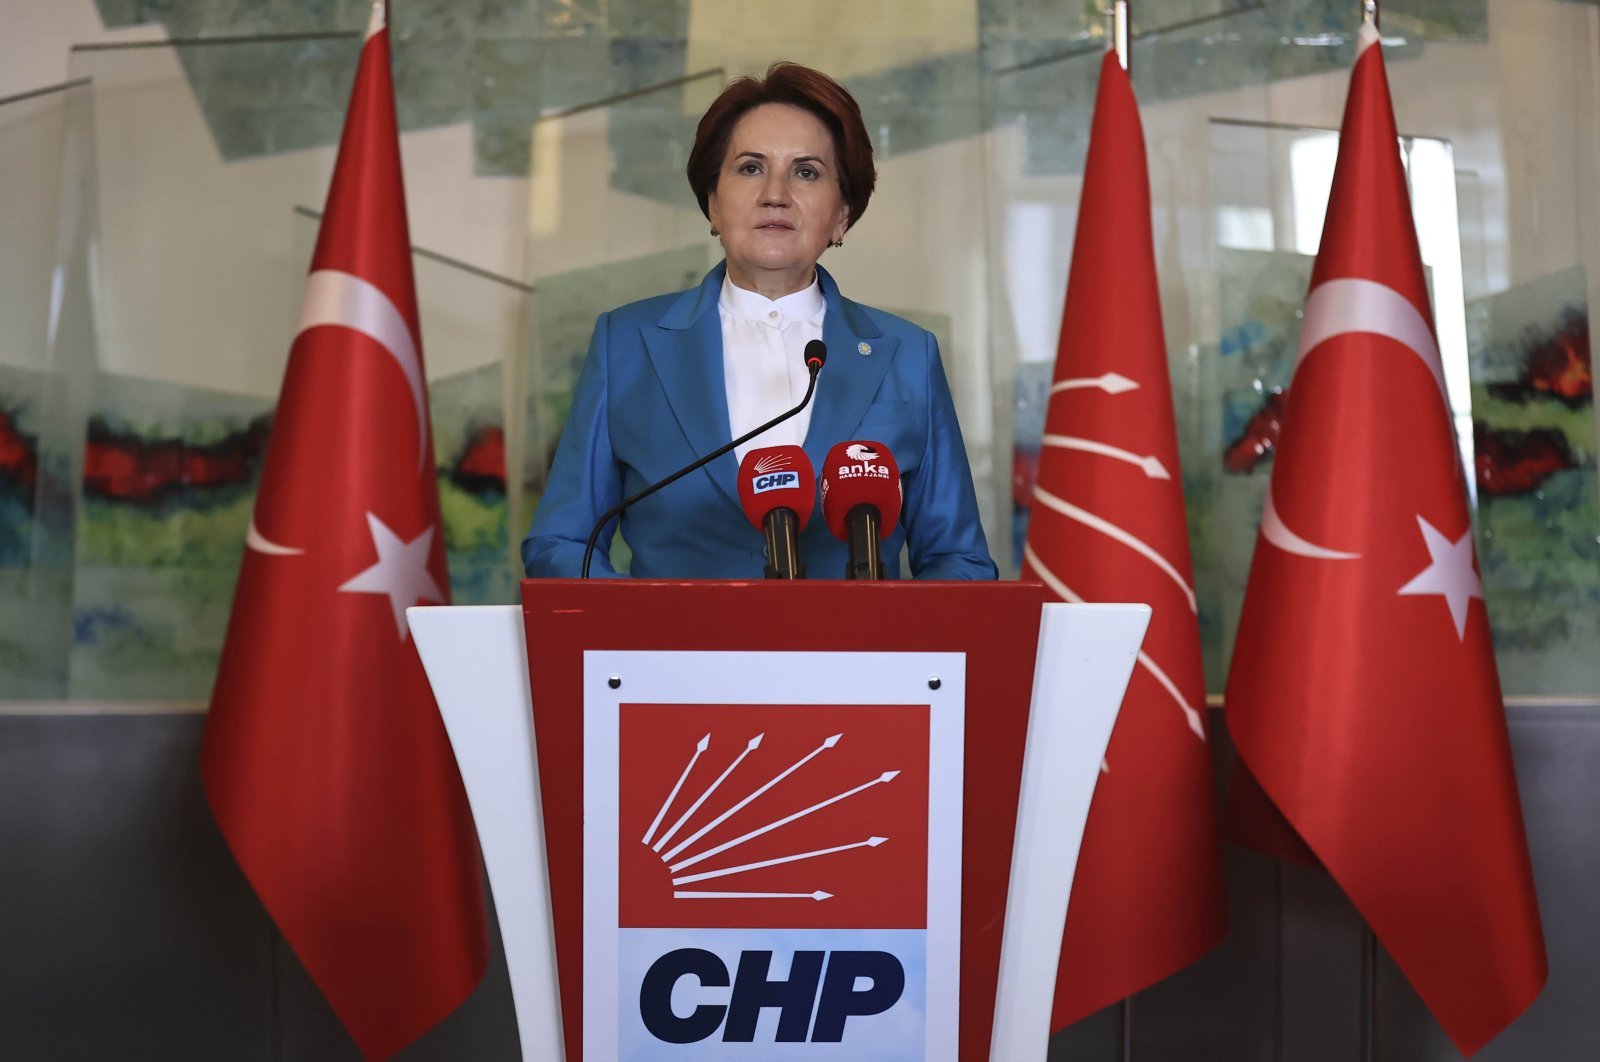 Good Party (IP) Chairperson Meral Akşener speaks at a press conference after a meeting with the main opposition center-left Republican People's Party (CHP) Chairperson Kemal Kılıçdaroğlu in the capital Ankara, Turkey, Oct. 20, 2021. (AA Photo)